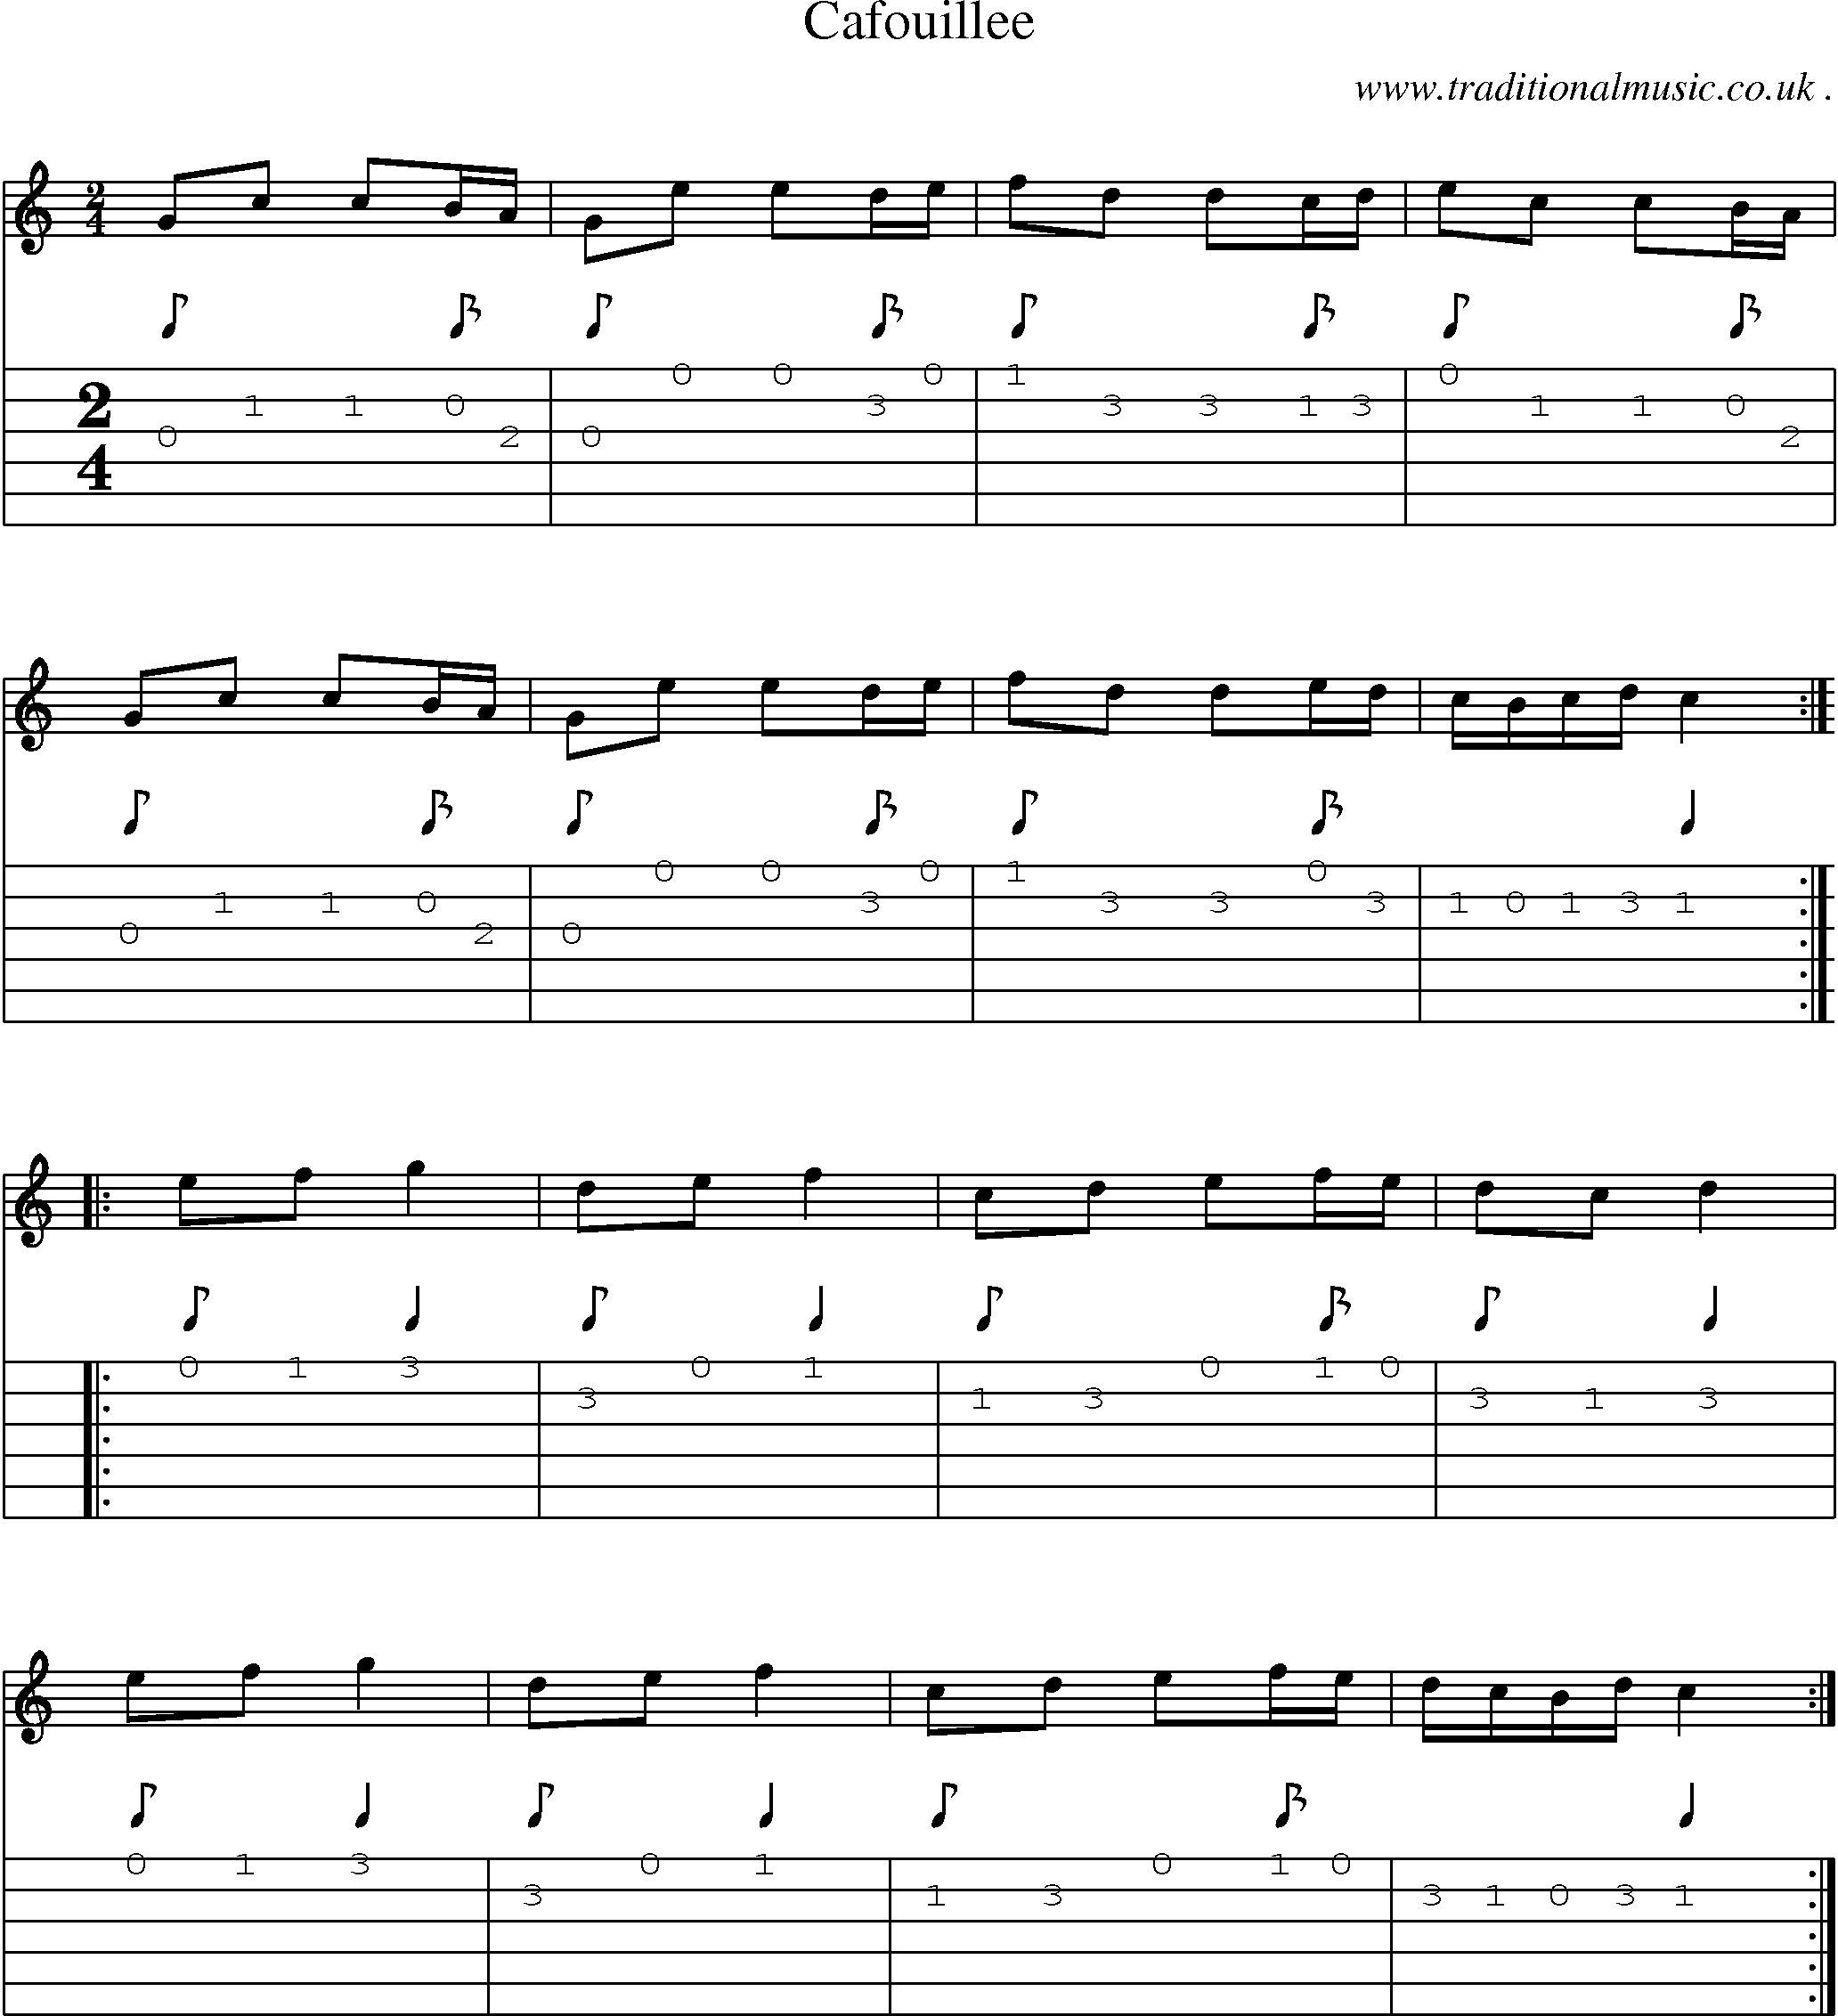 Sheet-Music and Guitar Tabs for Cafouillee